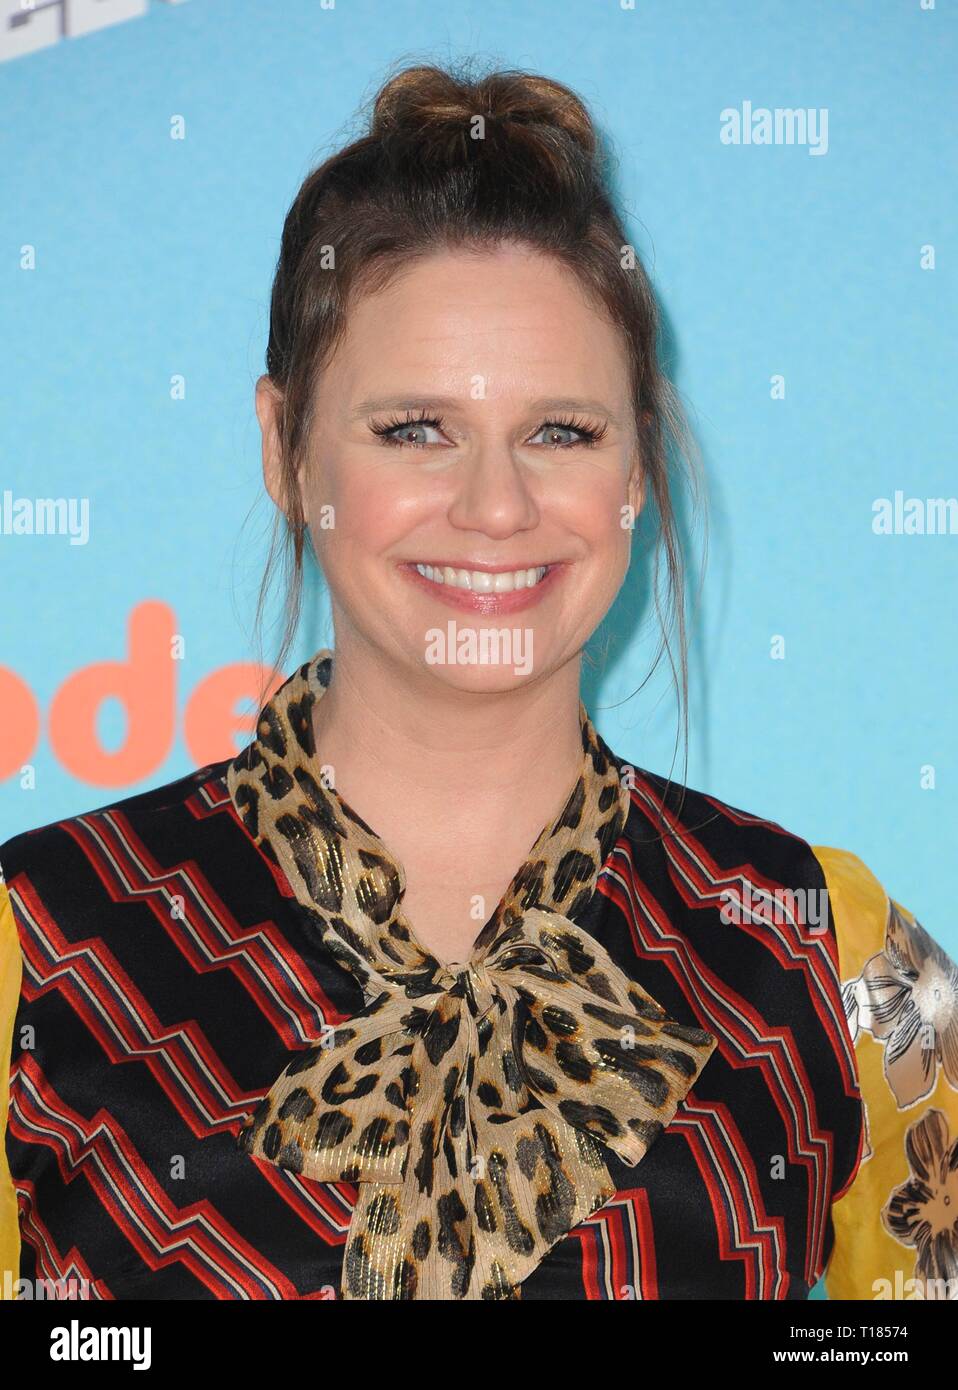 Los Angeles, CA, USA. 23rd Mar, 2019. Andrea Barber at arrivals for Nickelodeon 2019 Kids Choice Awards - Part 2, USC Galen Center, Los Angeles, CA March 23, 2019. Credit: Elizabeth Goodenough/Everett Collection/Alamy Live News Stock Photo